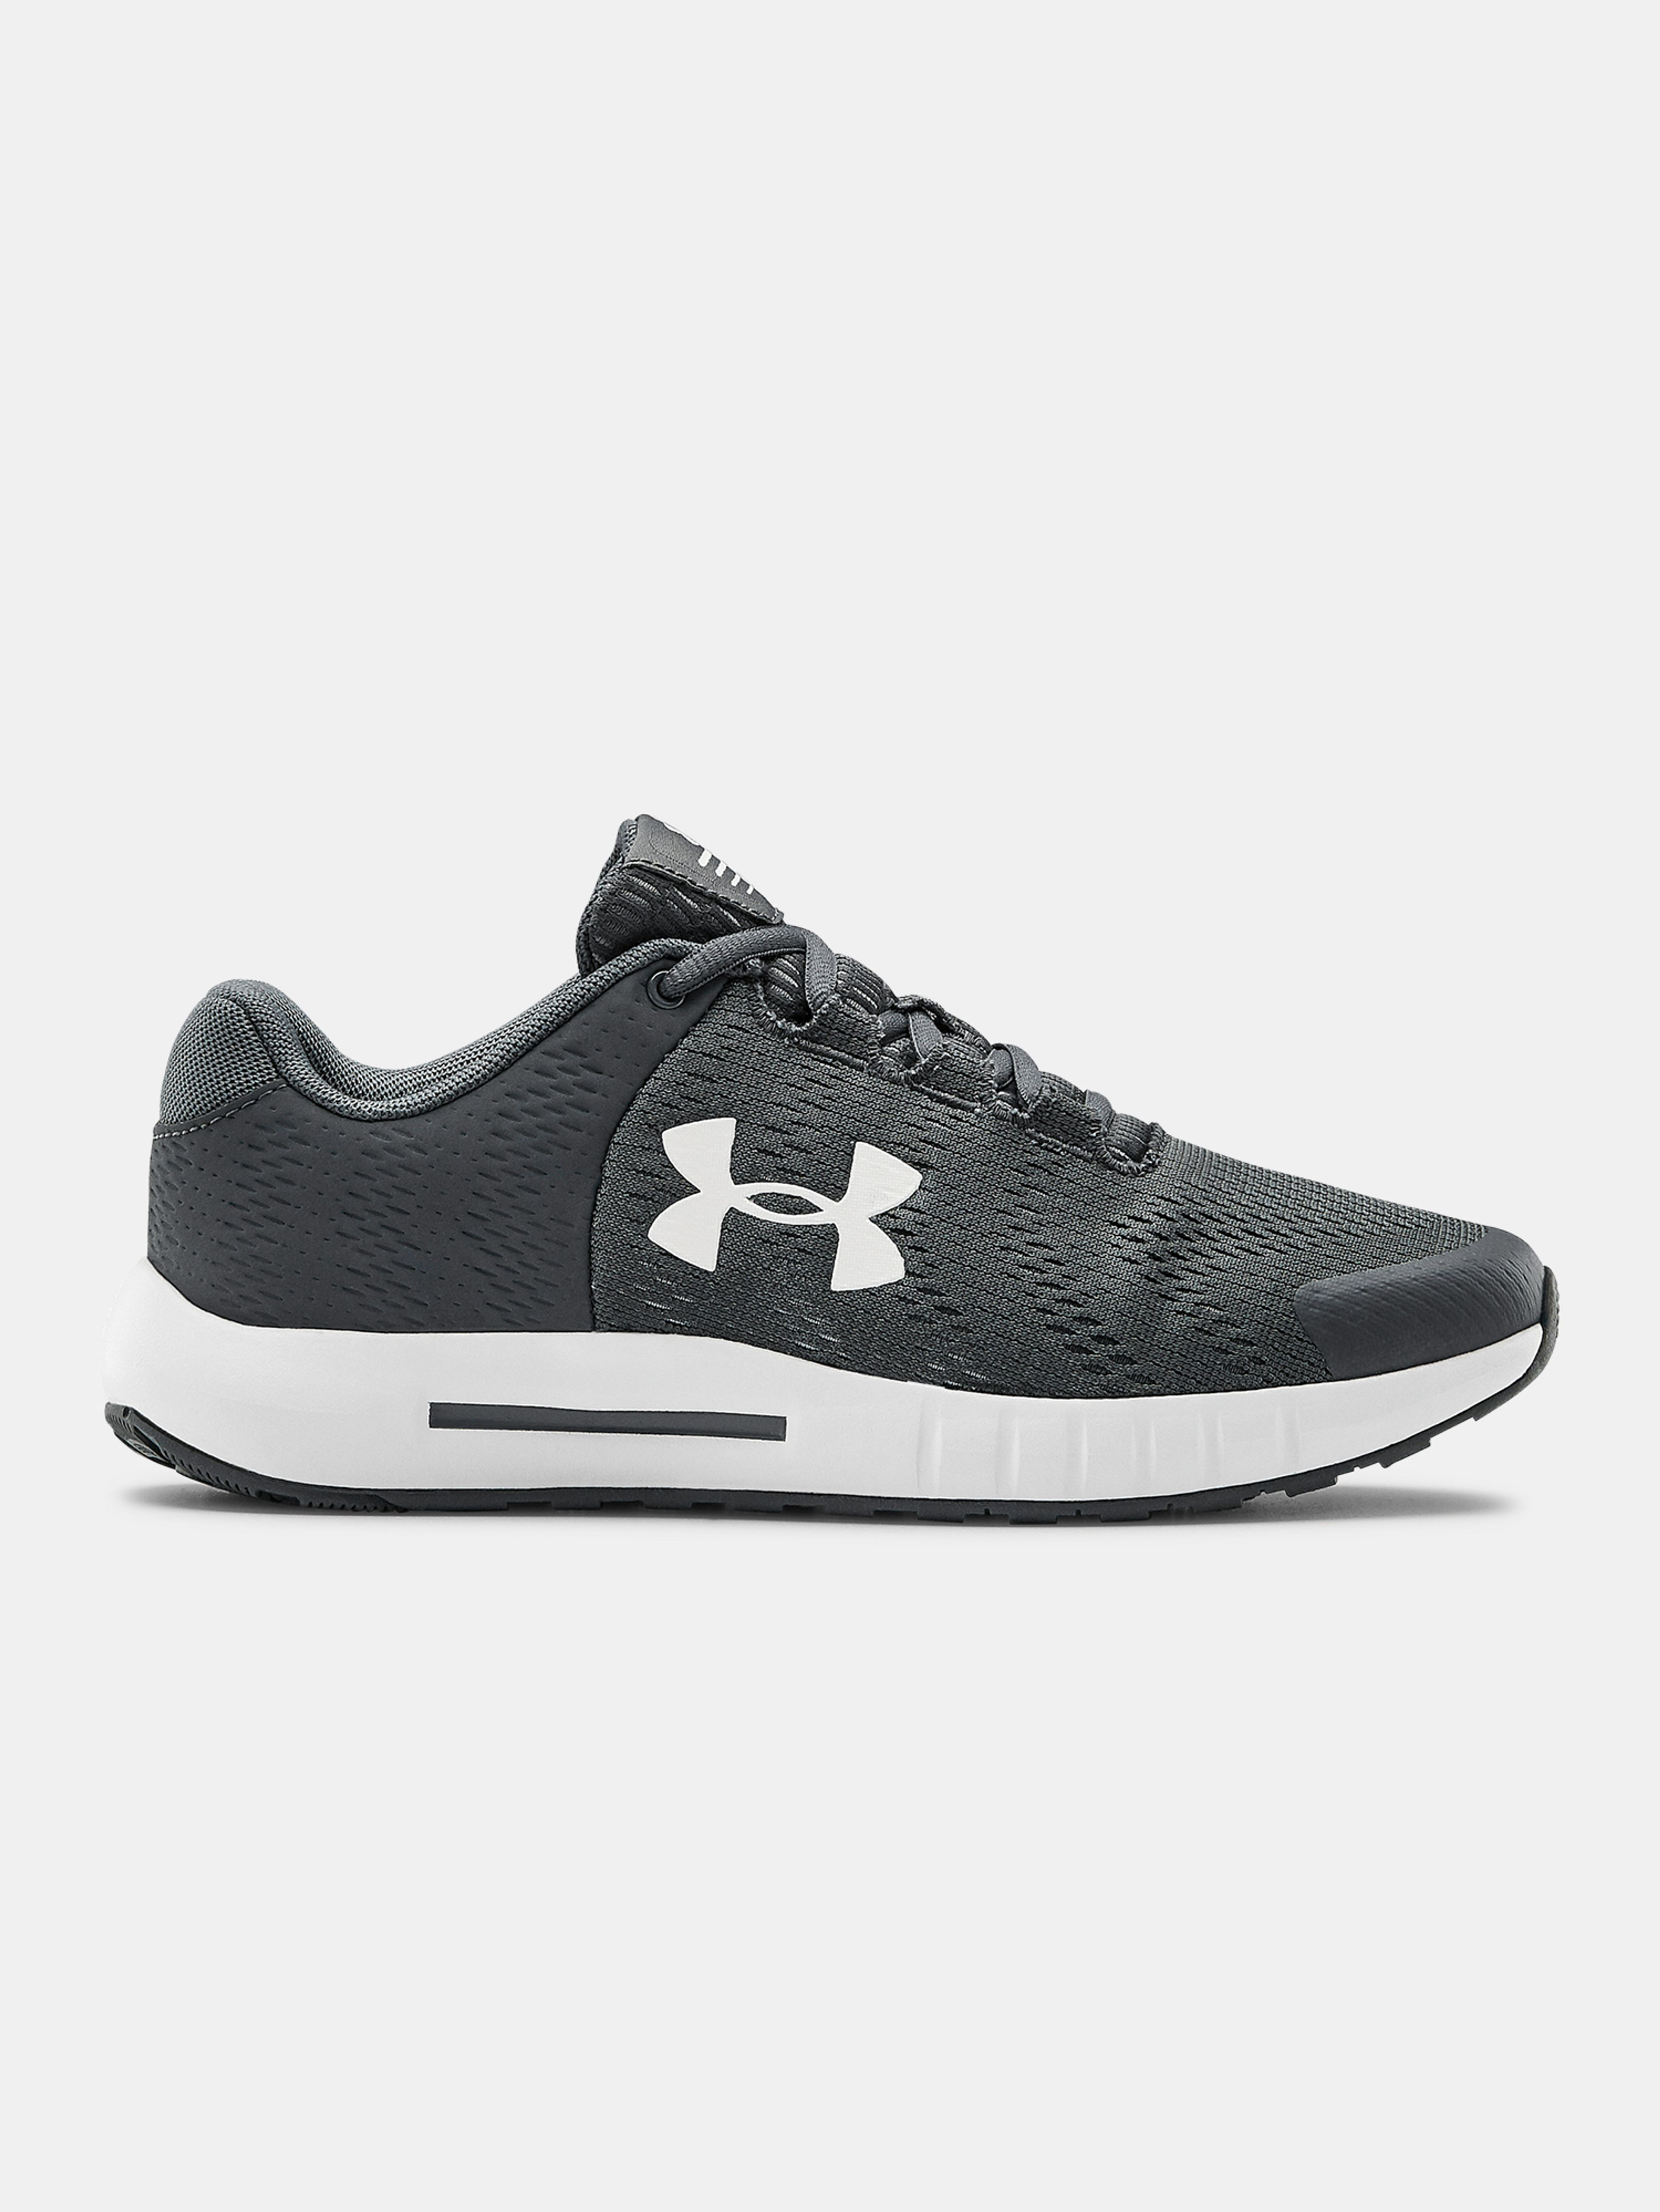 Boty Under Armour GS Pursuit BP-GRY